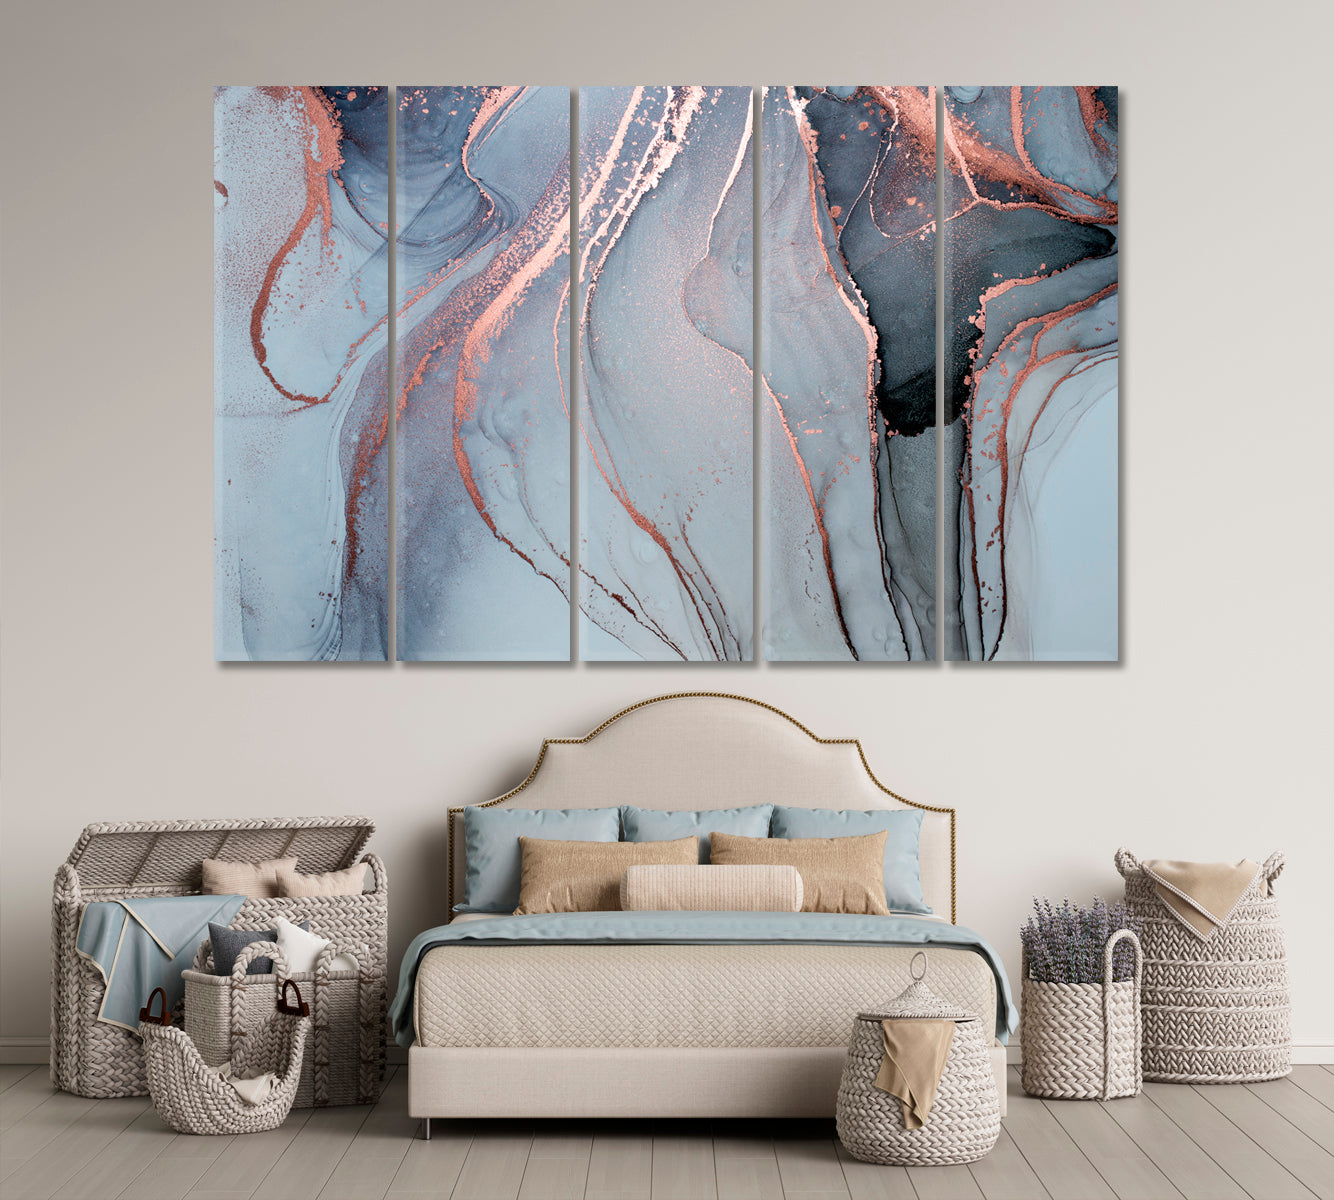 Currents Translucent Ink Hues Abstract Gray Marble Landscape Fluid Art, Oriental Marbling Canvas Print Artesty 5 panels 36" x 24" 